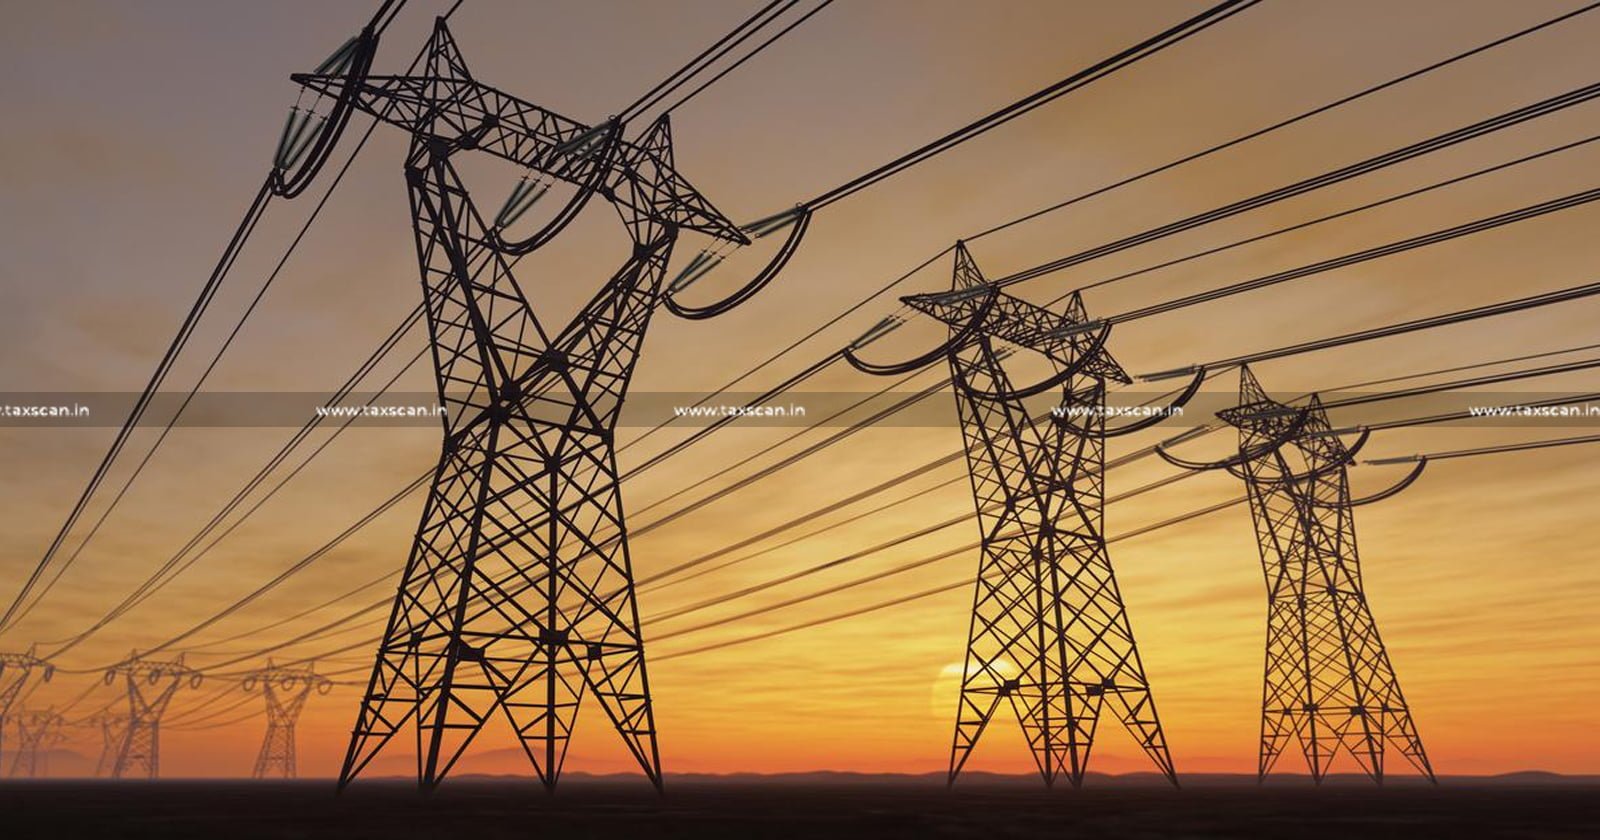 chamundeswari-electricity-supply-eligible-for-itc-aar